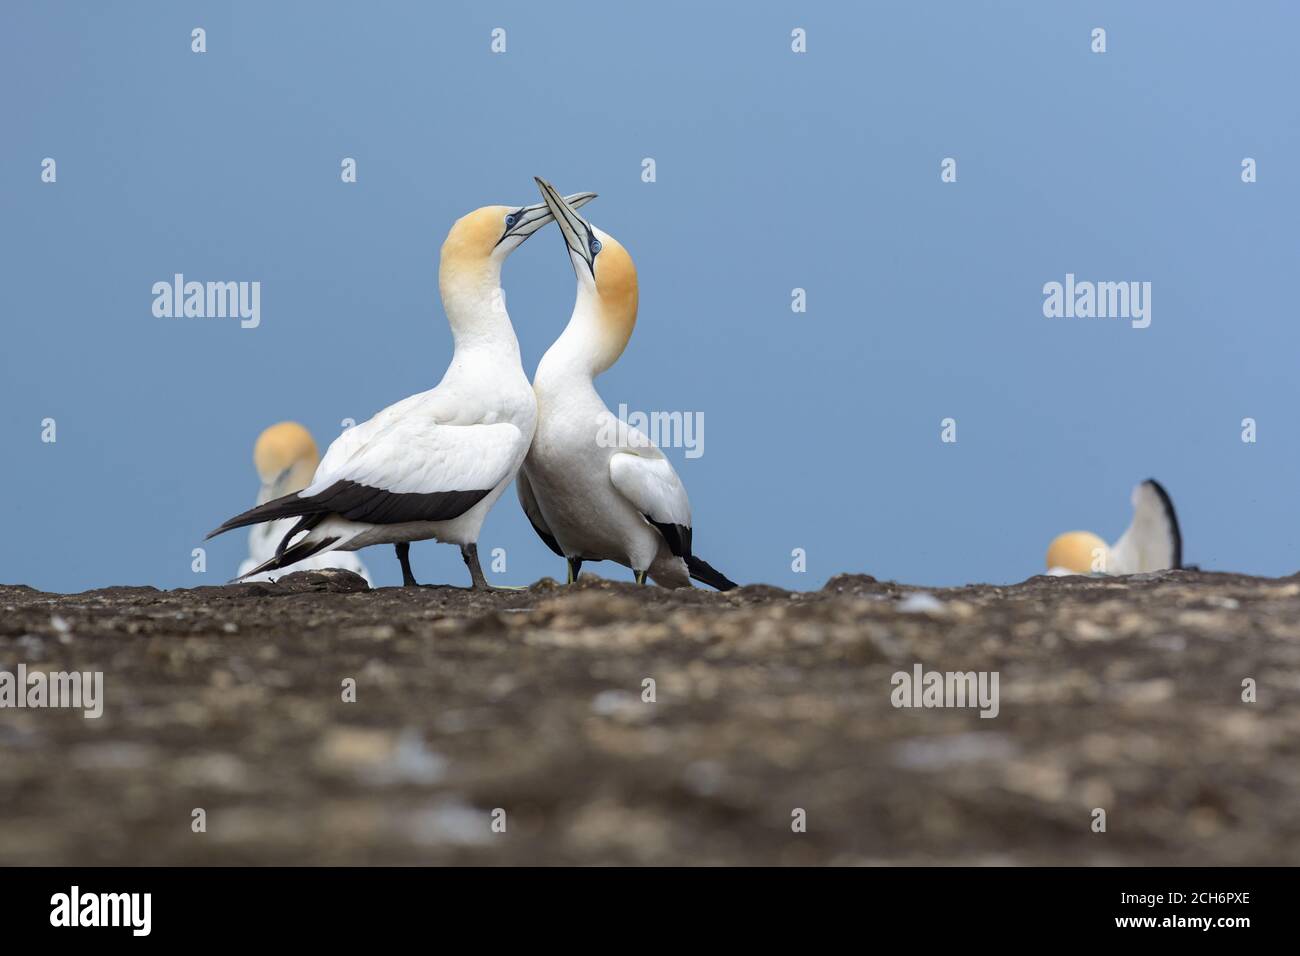 Picture shows Australasian gannet couple reuniting after separation. It is very common way to say welcome back, full of passion and love. Stock Photo